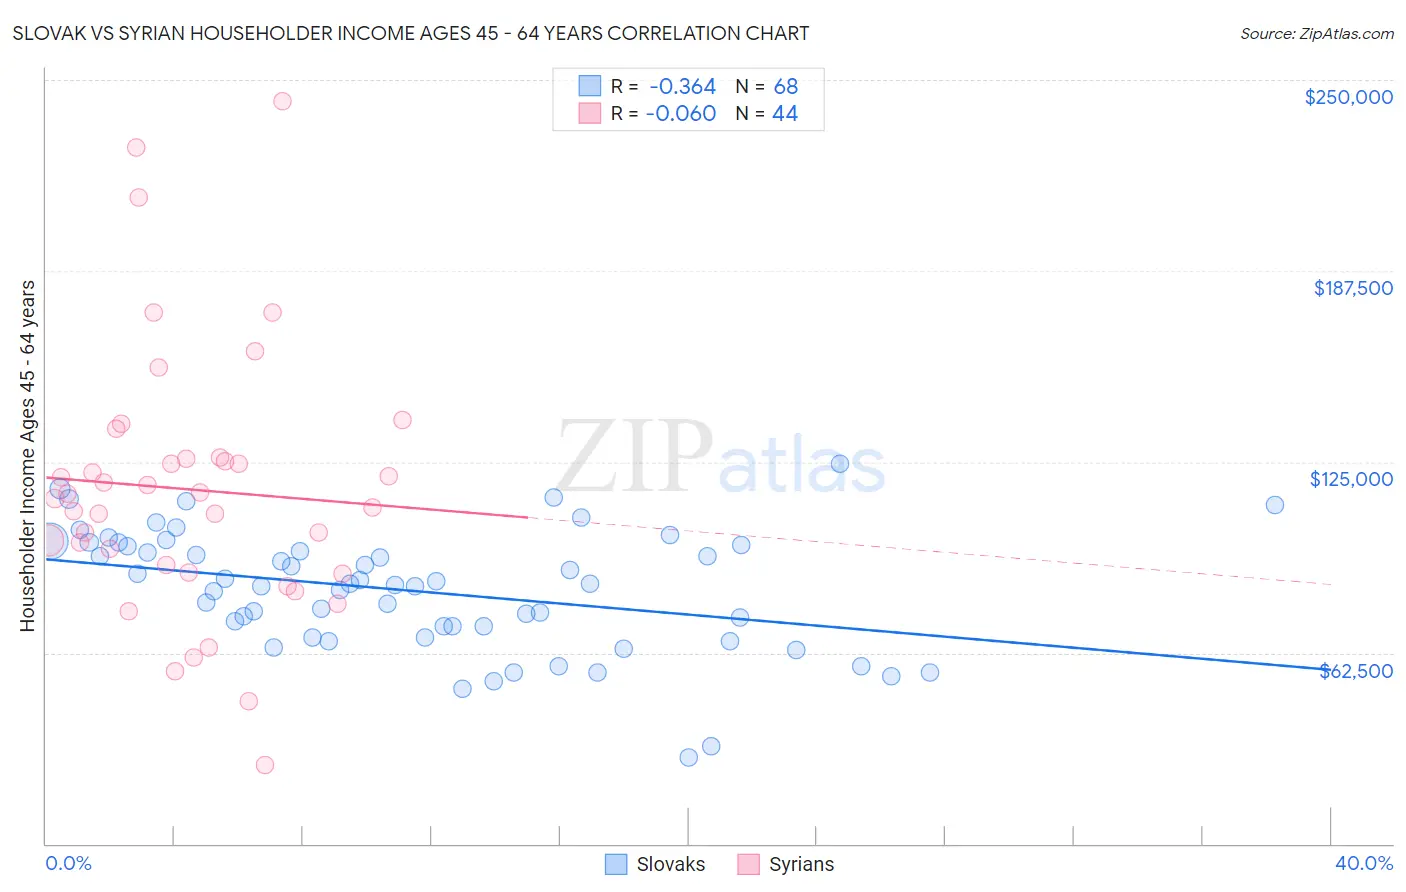 Slovak vs Syrian Householder Income Ages 45 - 64 years